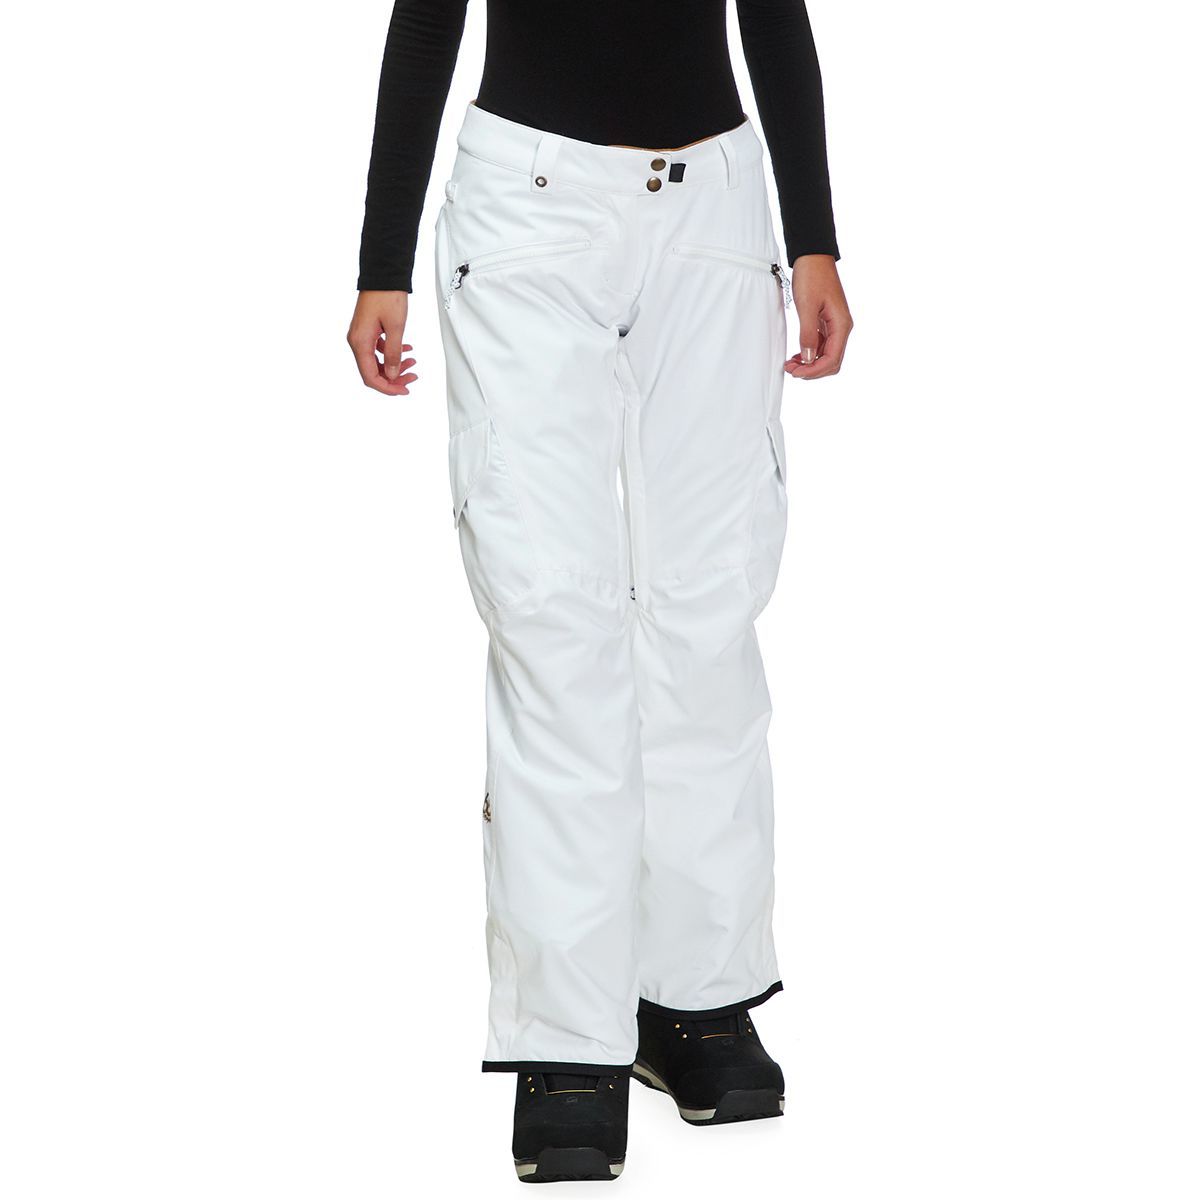 686 Mistress Insulated Pant - Women's